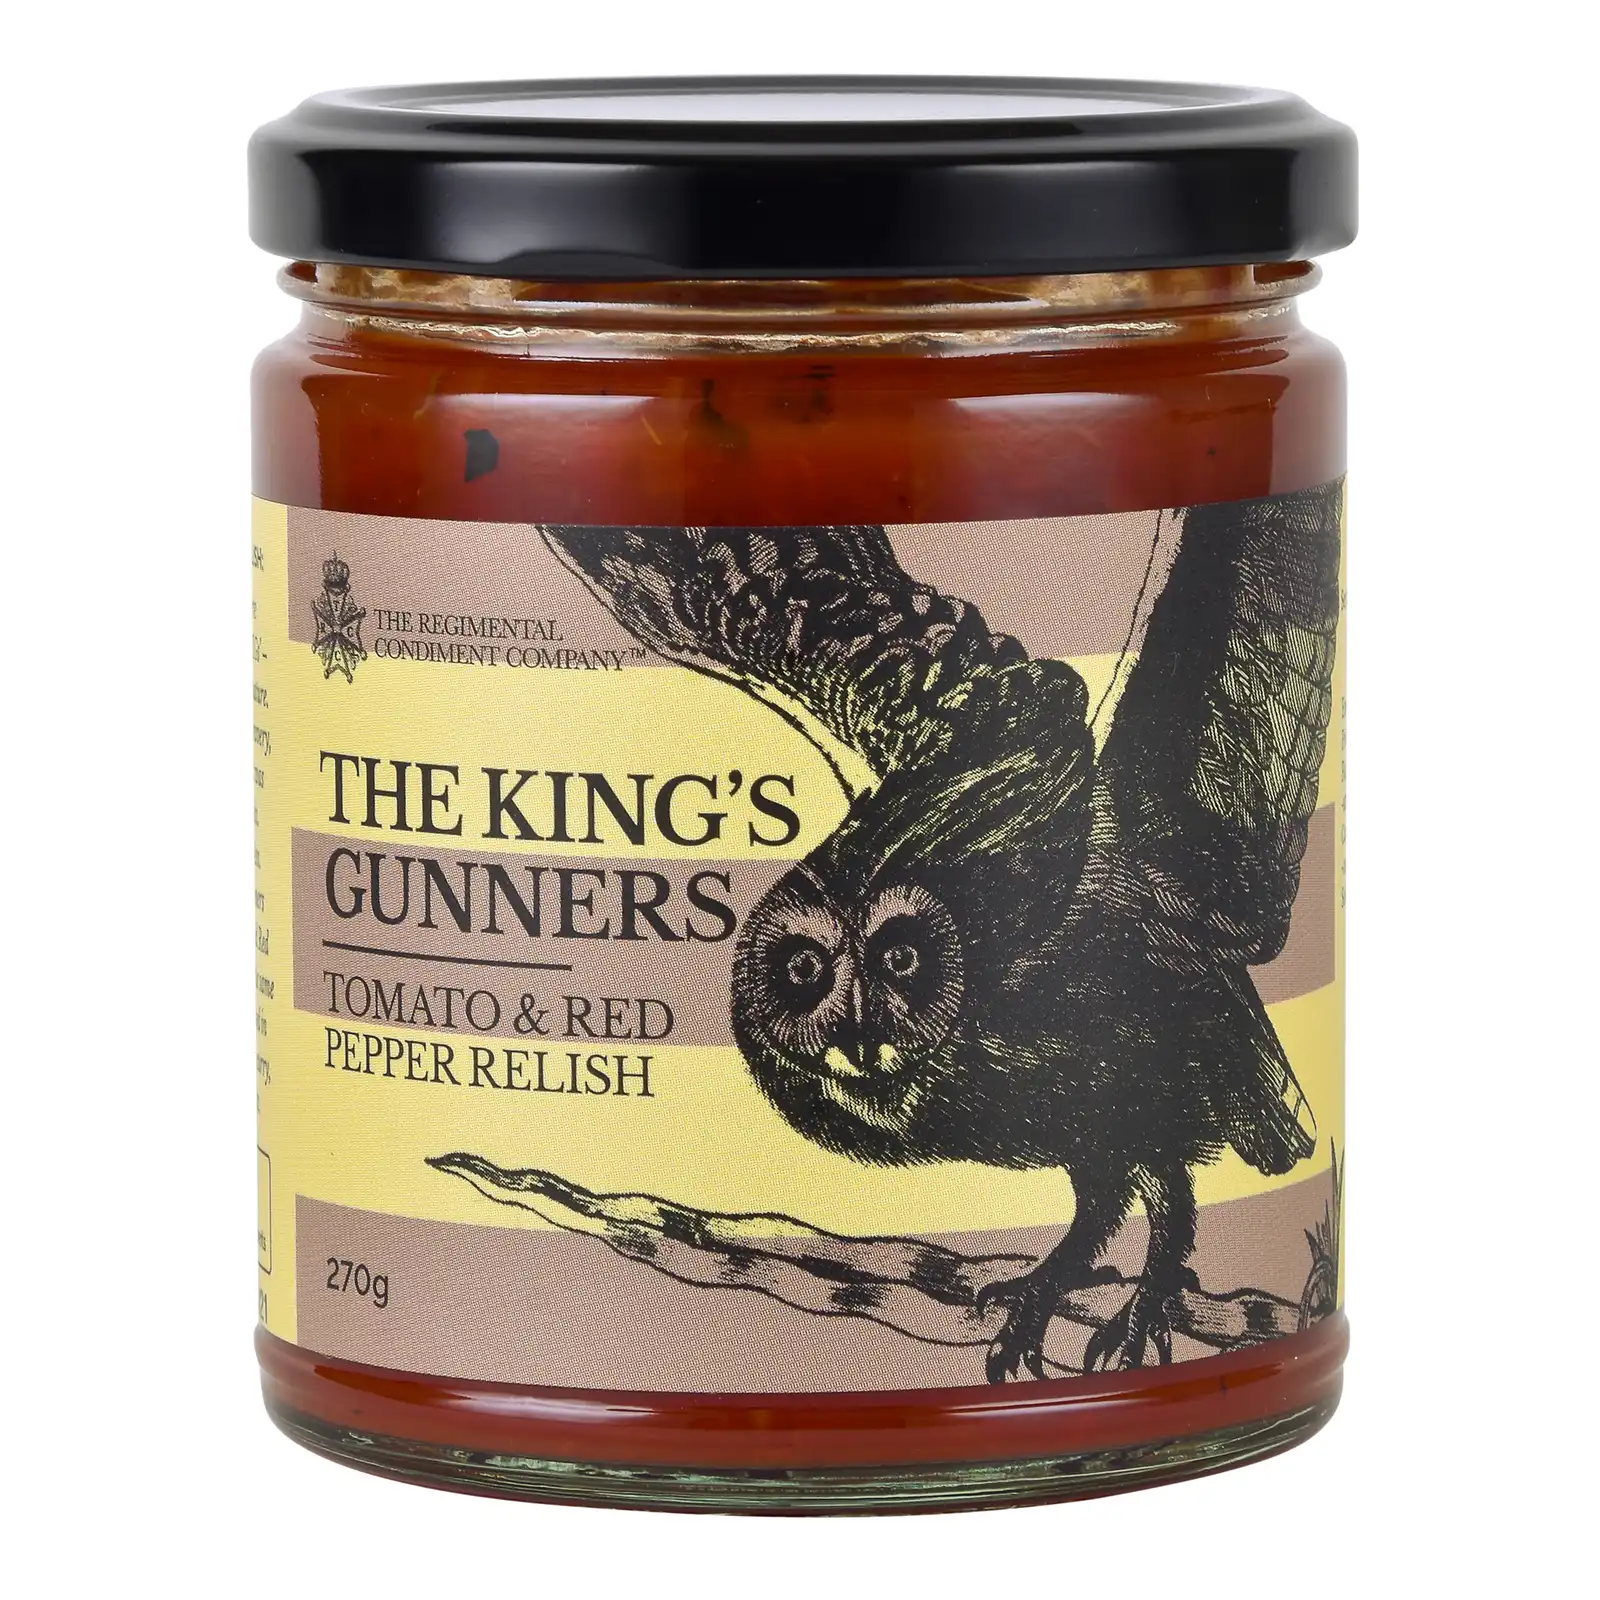 TRCC The King's Gunners Tomato & Red Pepper Relish 270G